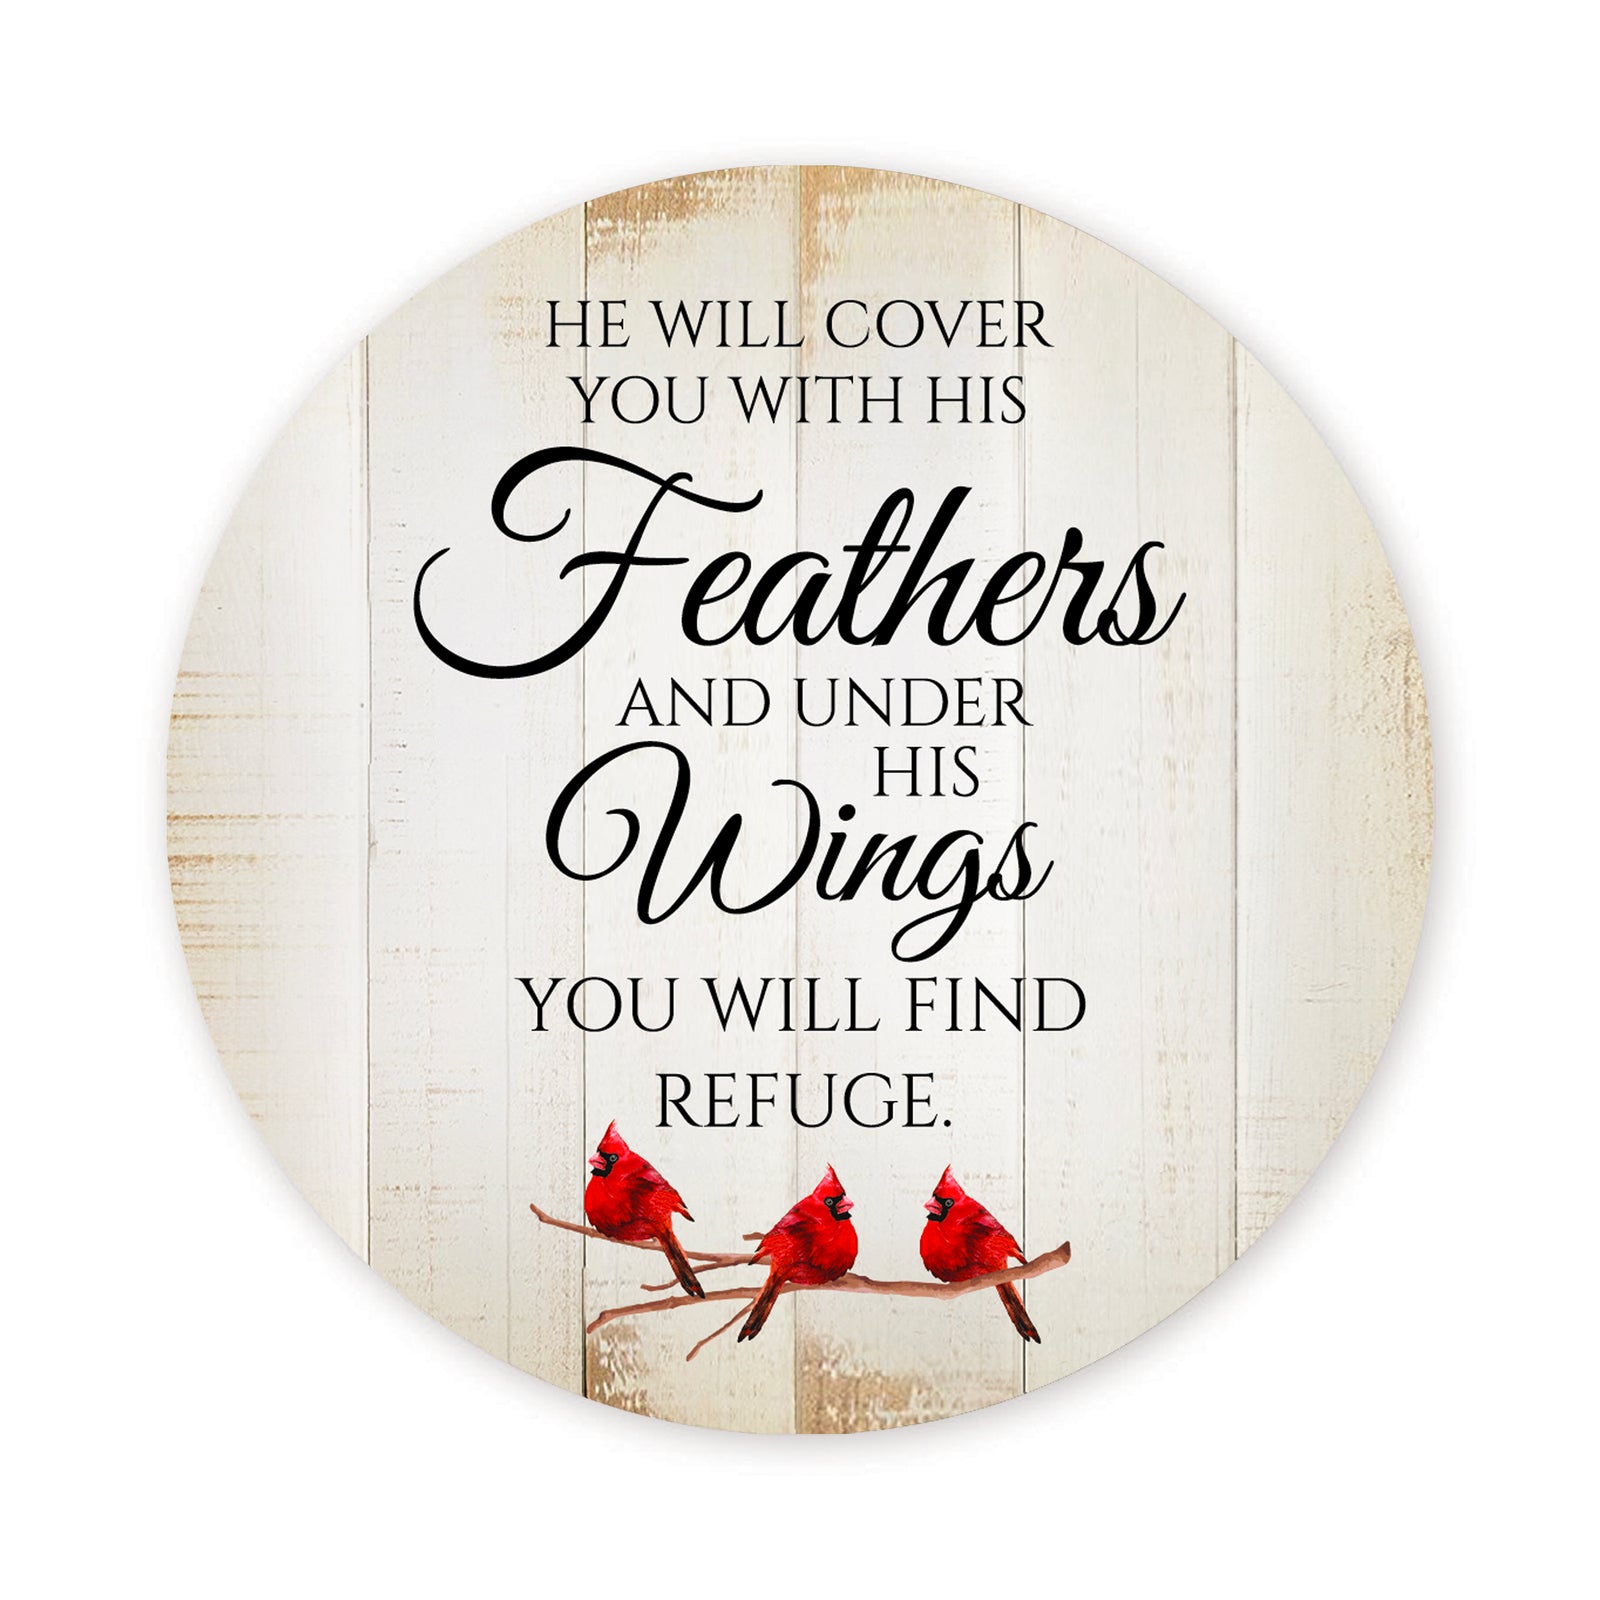 Vintage-Inspired Cardinal Wooden Magnet Printed With Everyday Inspirational Verses Gift Ideas - He Will Cover